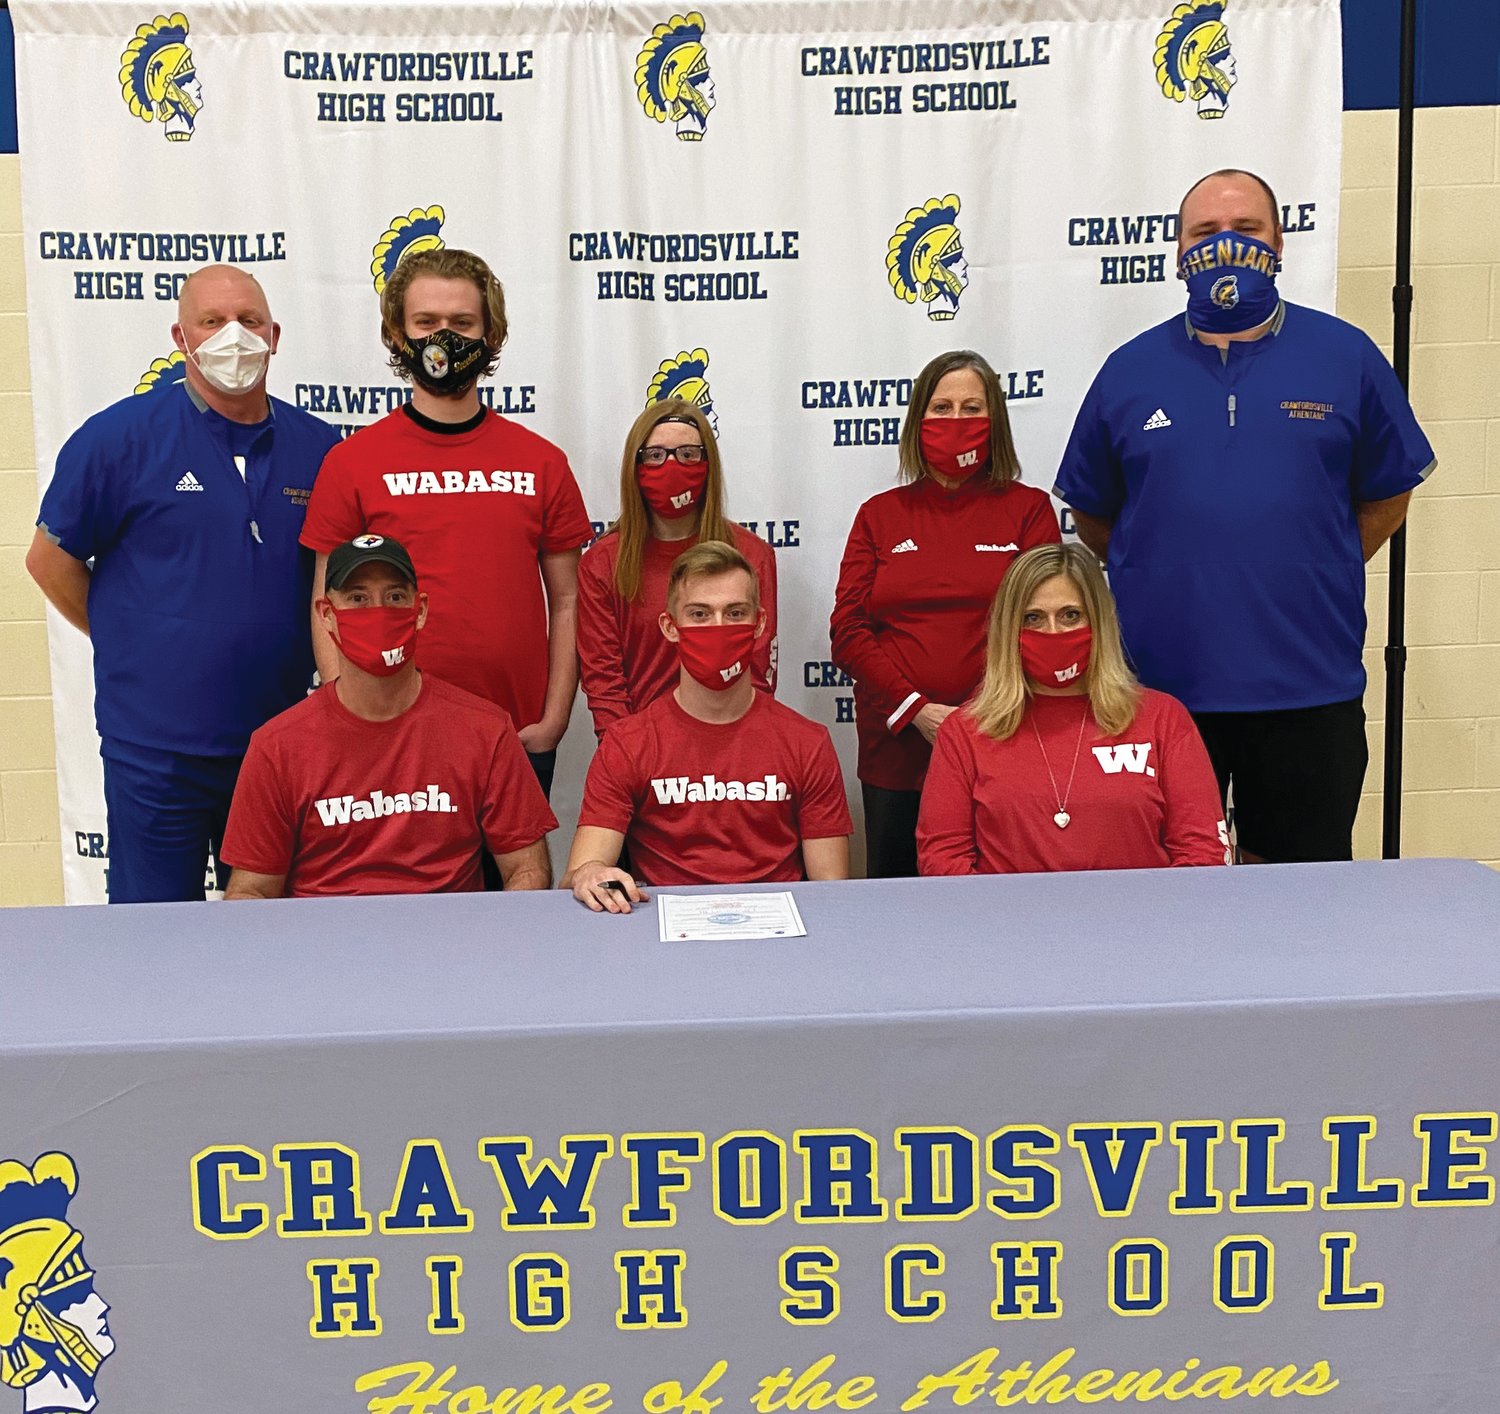 Crawfordsville football player and senior Andrew Martin will continue his career at Wabash College in the fall. PICTURED: Front Row L-R Andrew’s father, Jesse Martin, Andrew, mother, Stephanie Wethington. Back Row L-R Crawfordsville coach Kurt Schlicher, brother, Peyton Suiter, sister, Madison Martin, grandmother, Ginger Collins, and assistant football coach Sean Gerold.